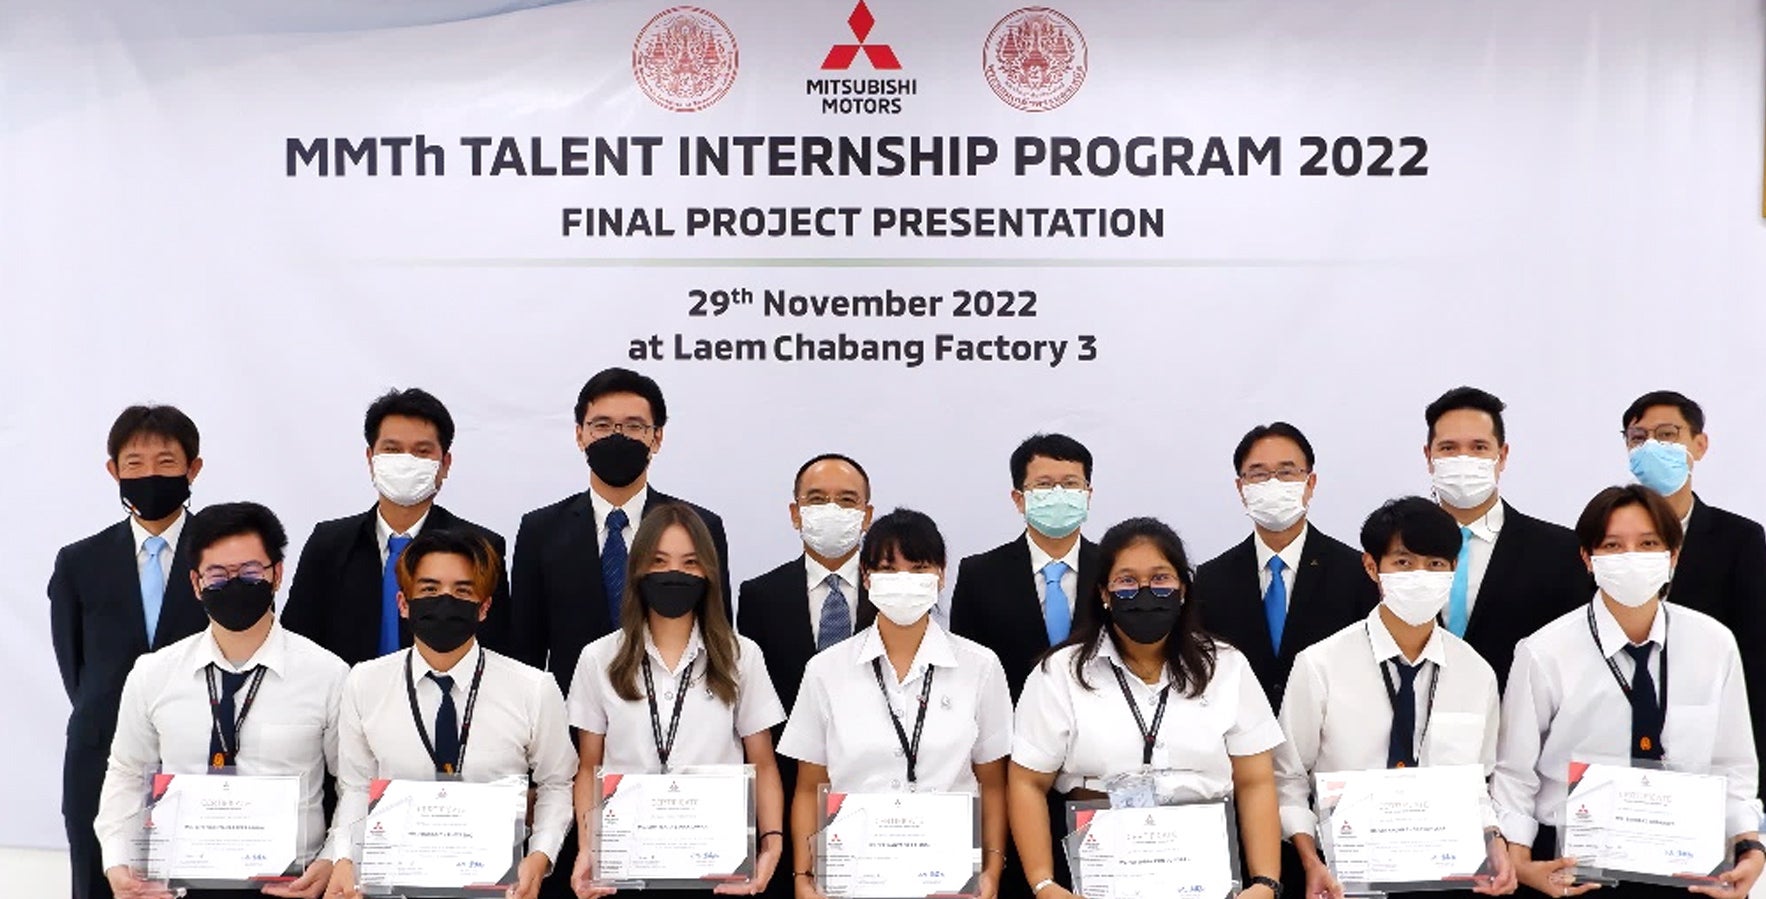 Mitsubishi Motors Thailand continues to further Thailand’s education support under MMTh Talent